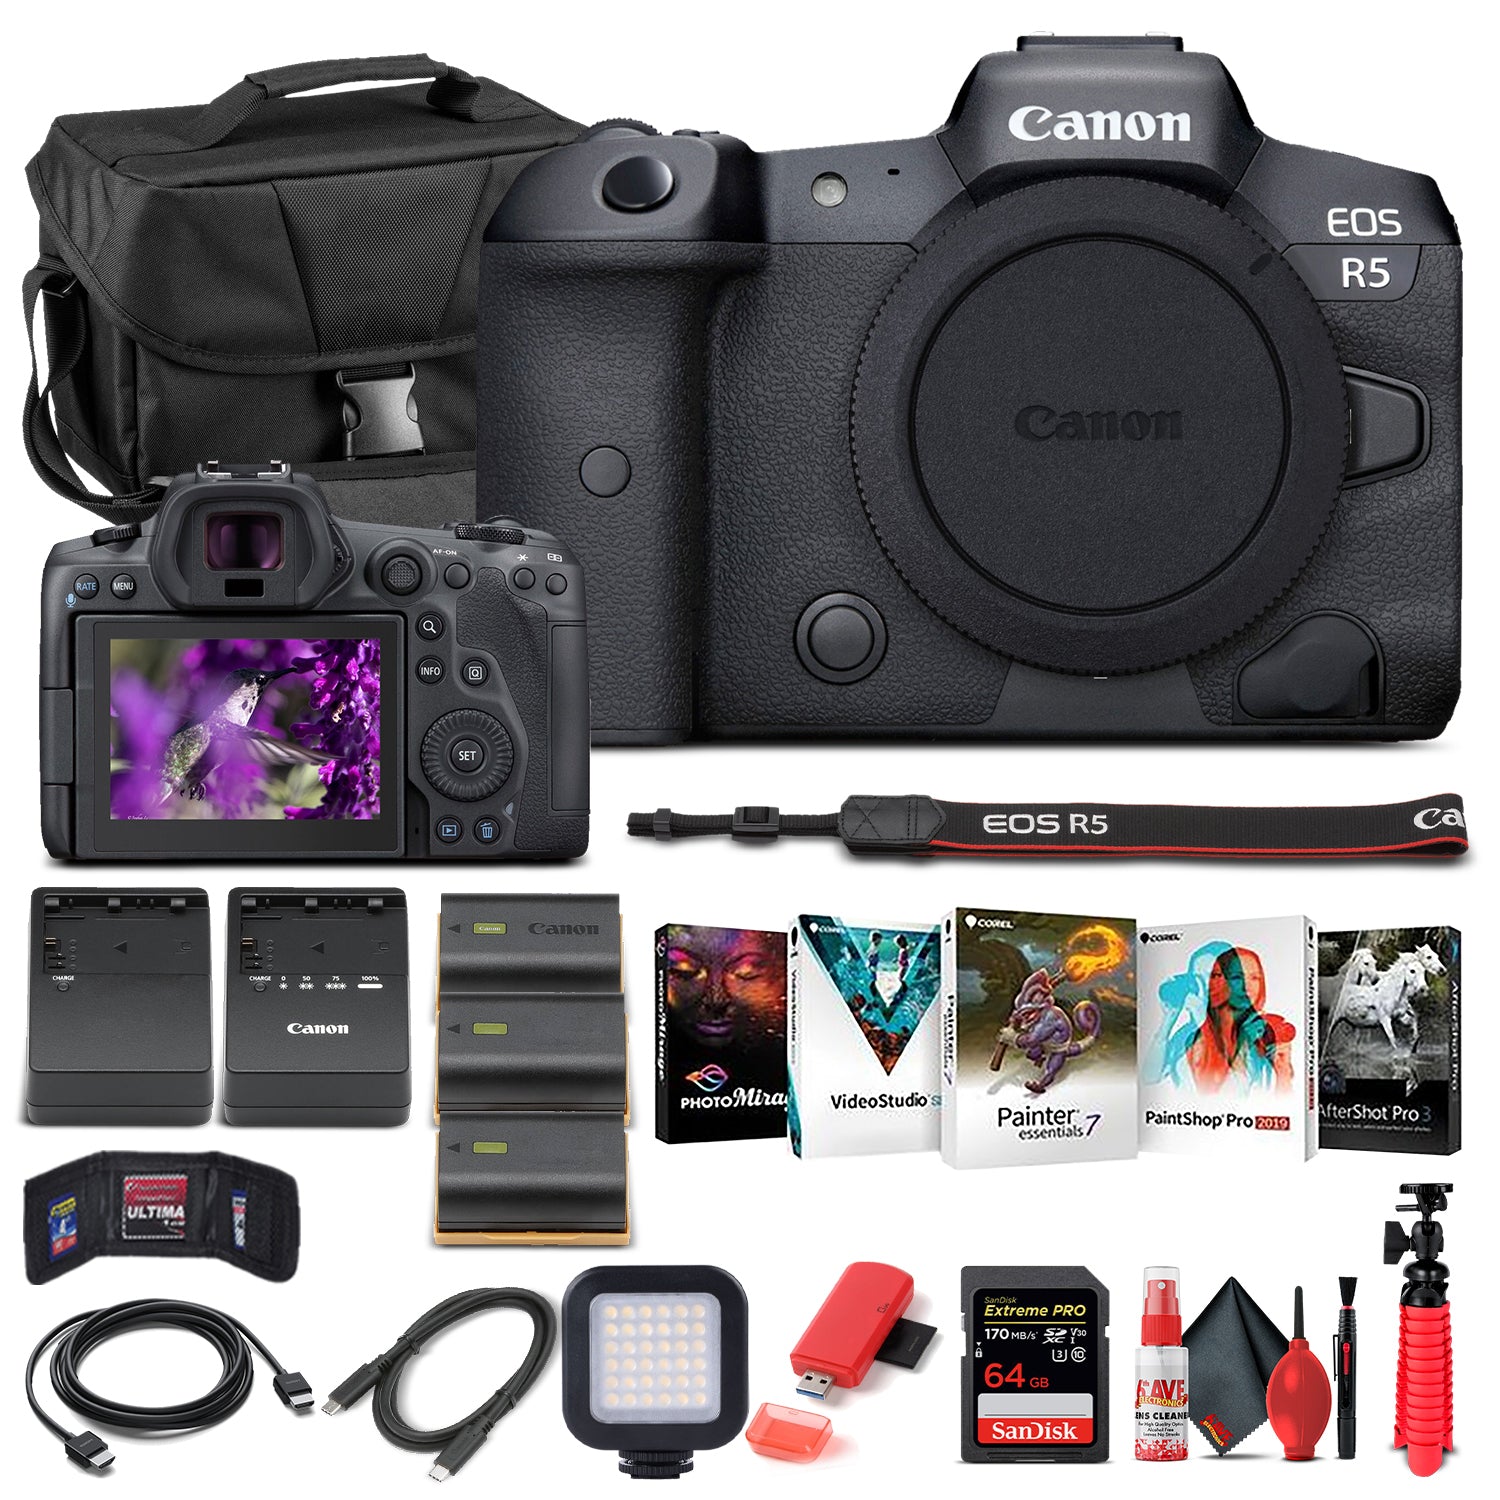 Canon EOS R5 Mirrorless Camera Body Only 4147C002 - Pro Bundle